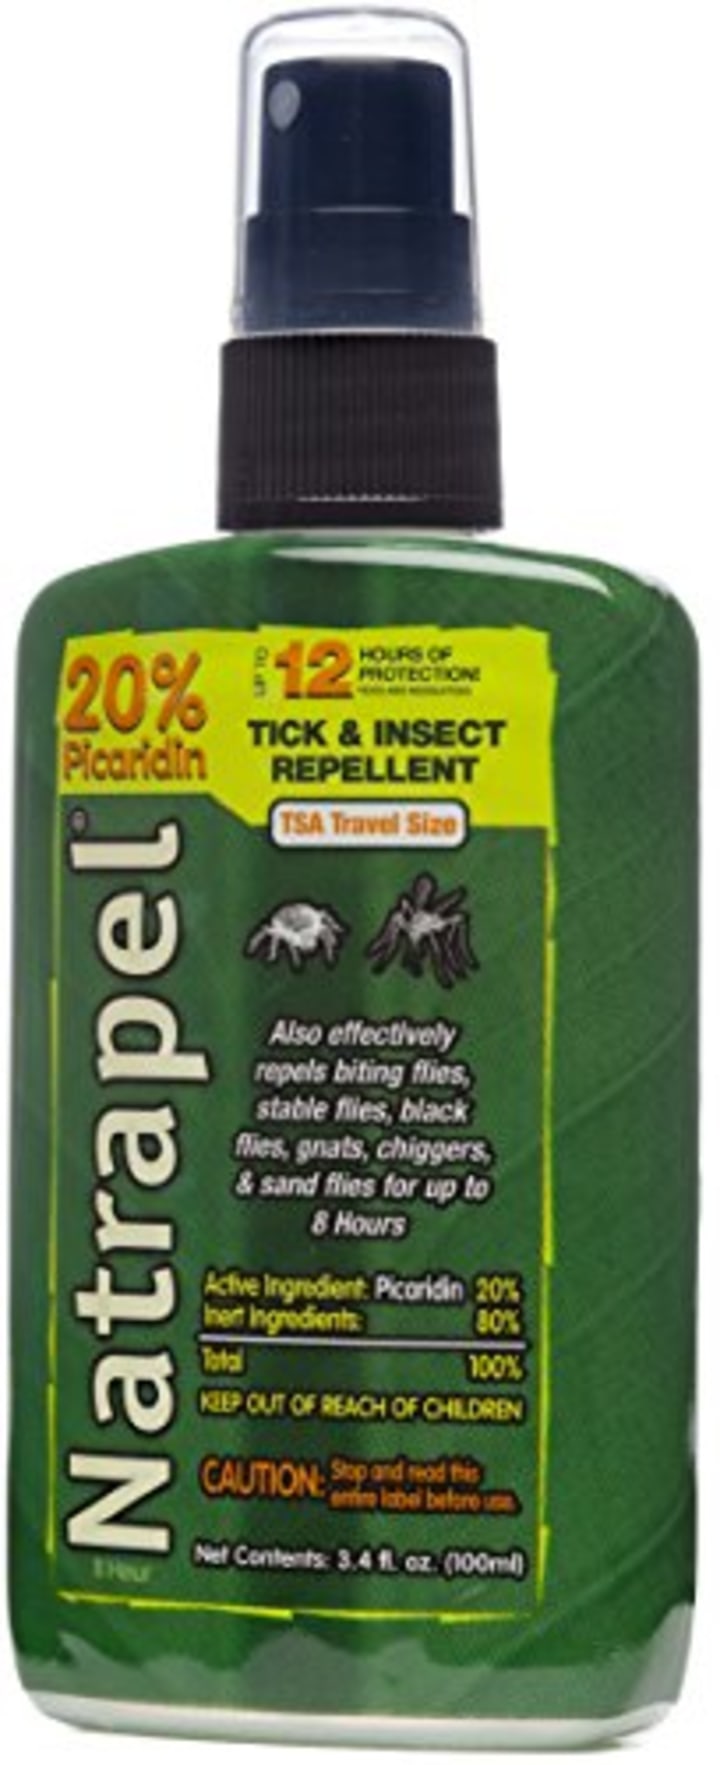 Natrapel 12-Hour Mosquito, Tick and Insect Repellent Pump Spray